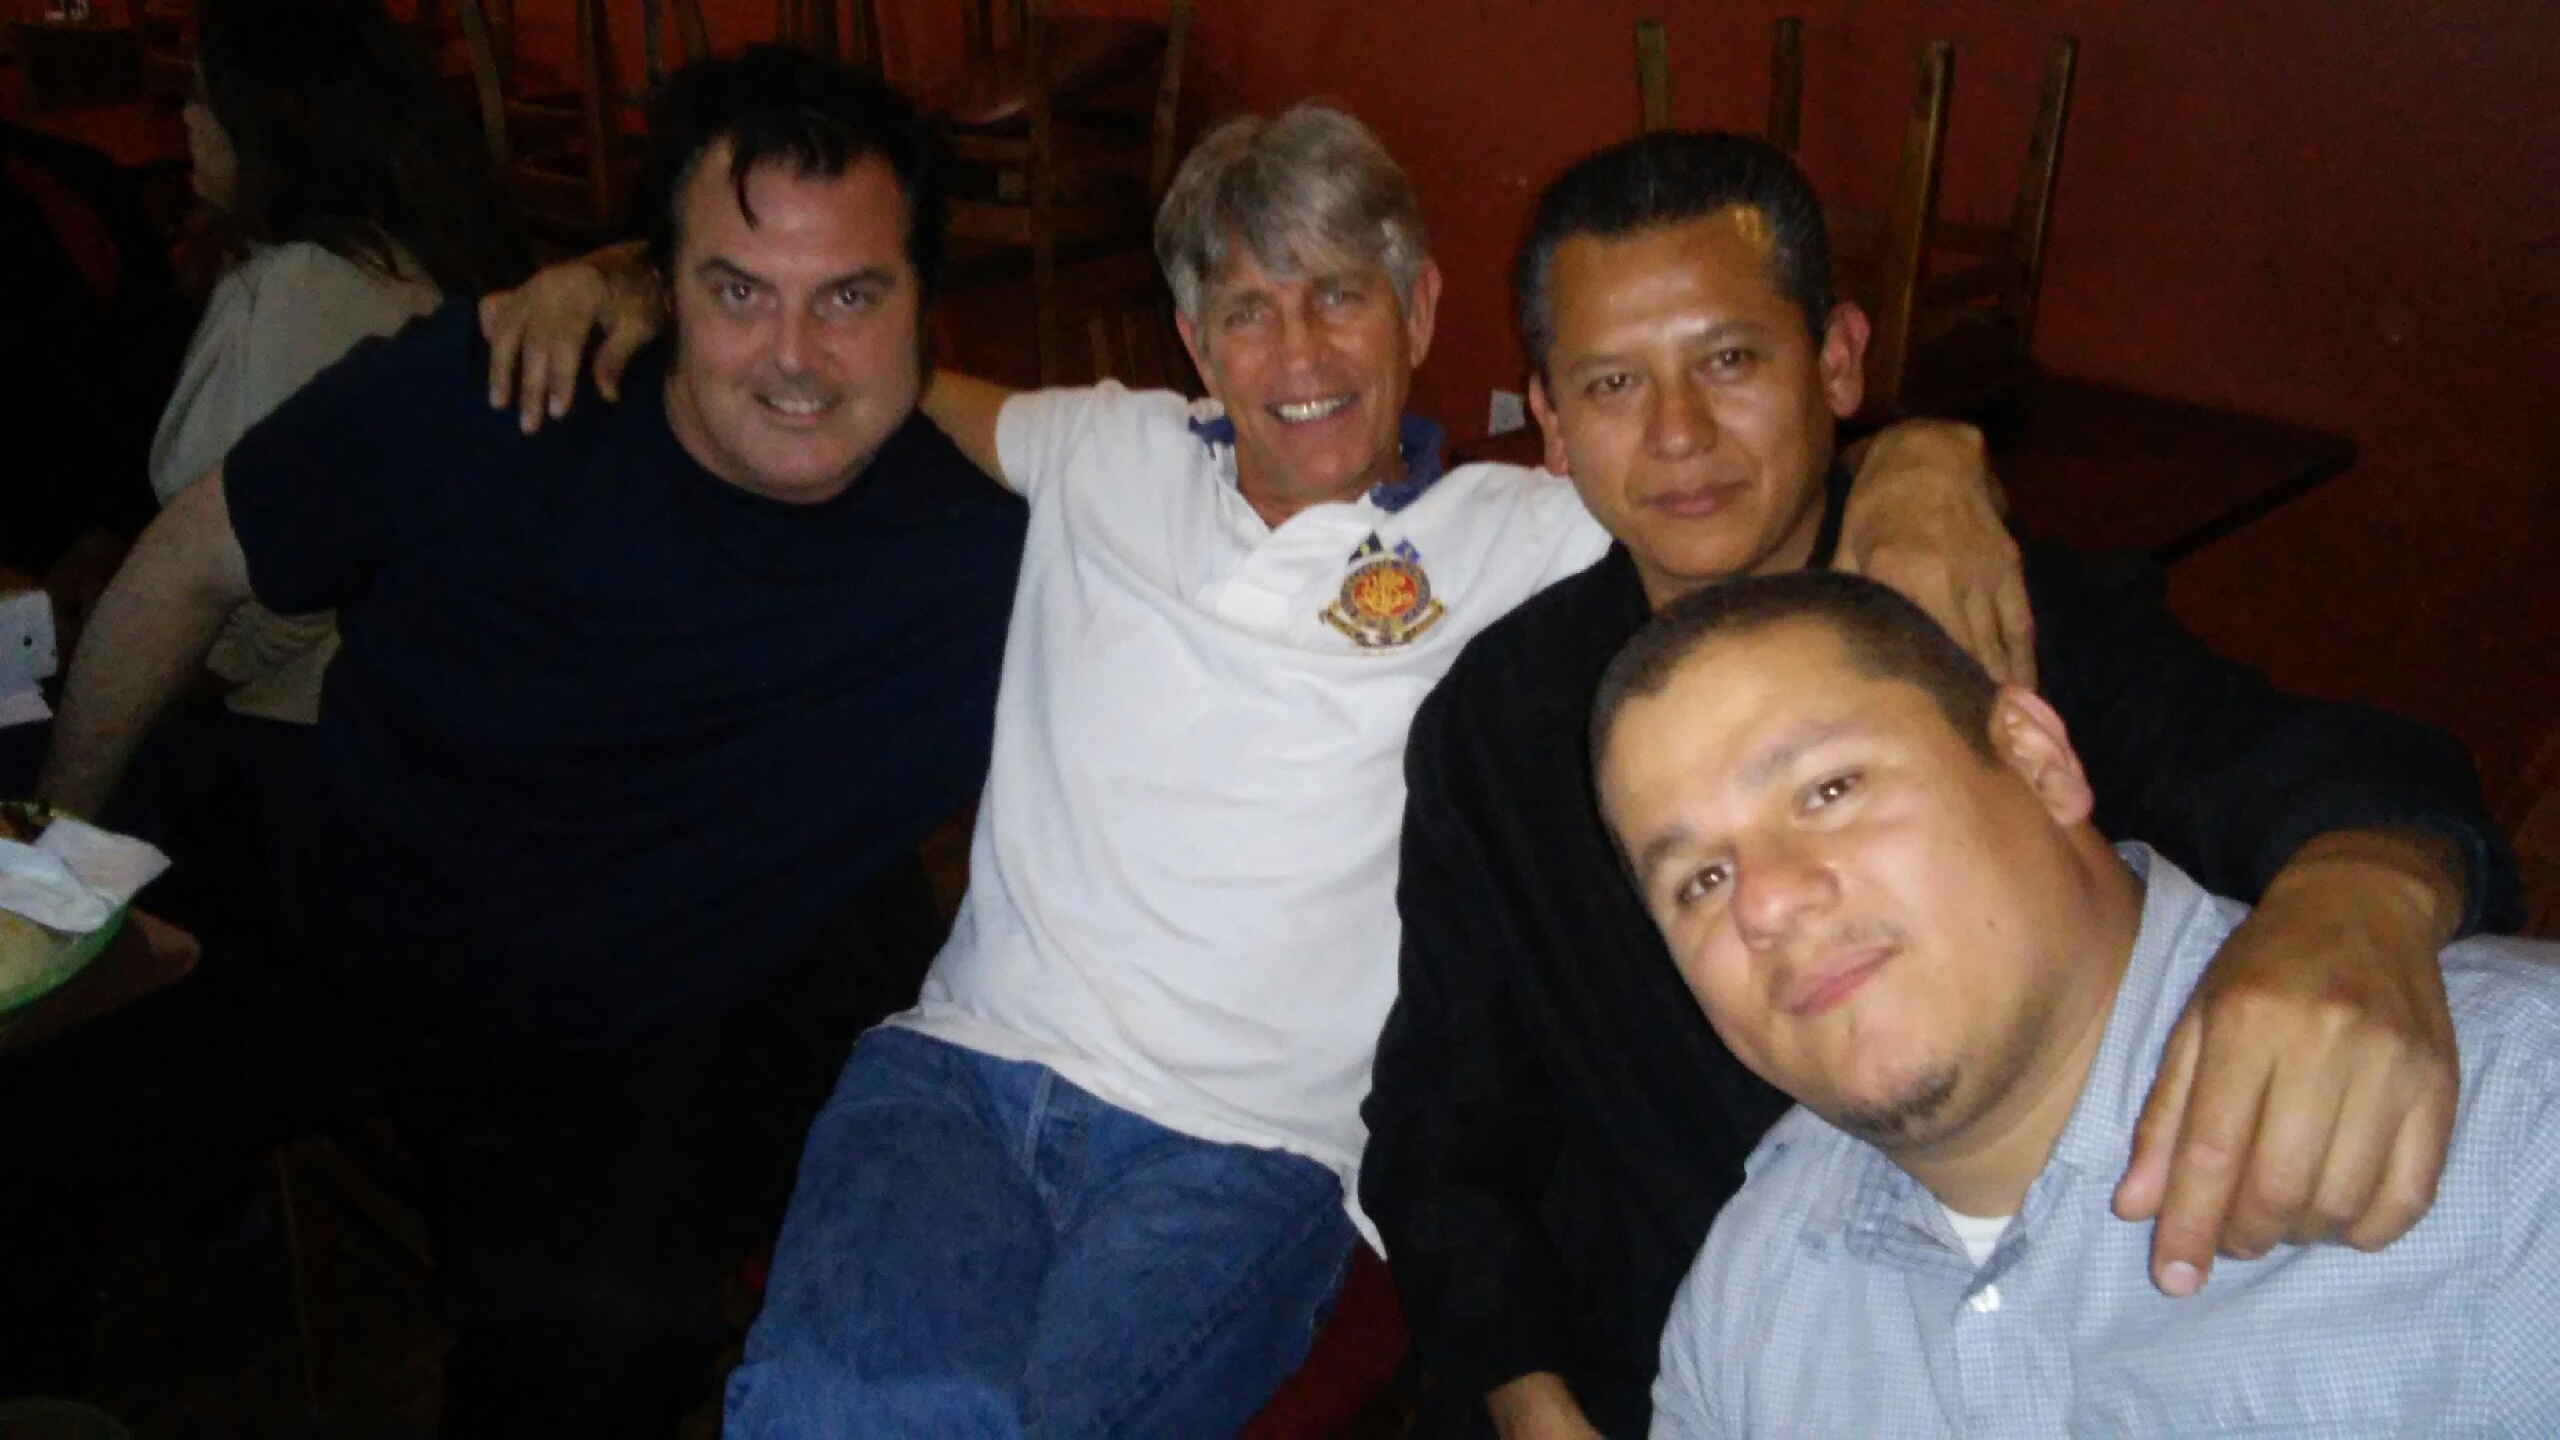 Elvis Guinan. Eric Roberts. Fernando and Bogart in ENEMY WITHIN May 2015 Los Angeles, California USA